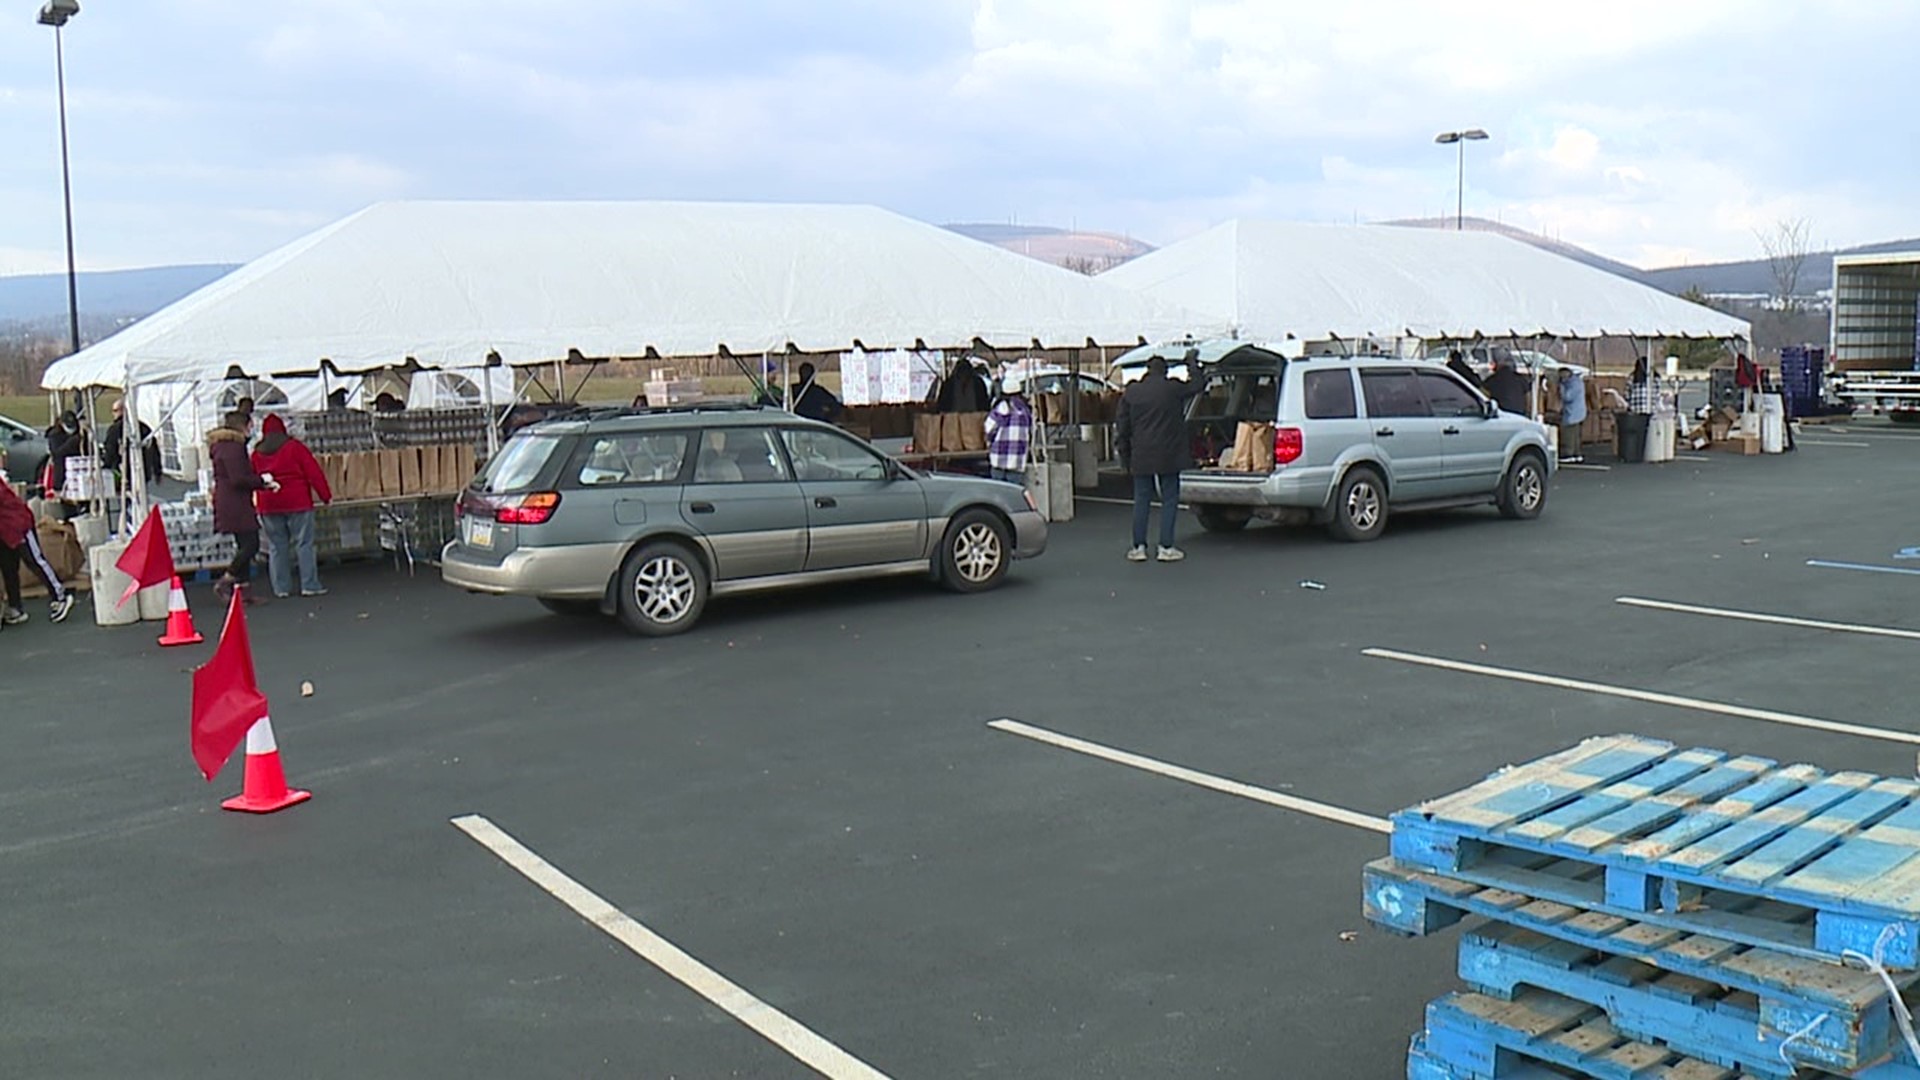 Thousands of people in Scranton will have Christmas dinner this weekend thanks to an effort from a few local charities.